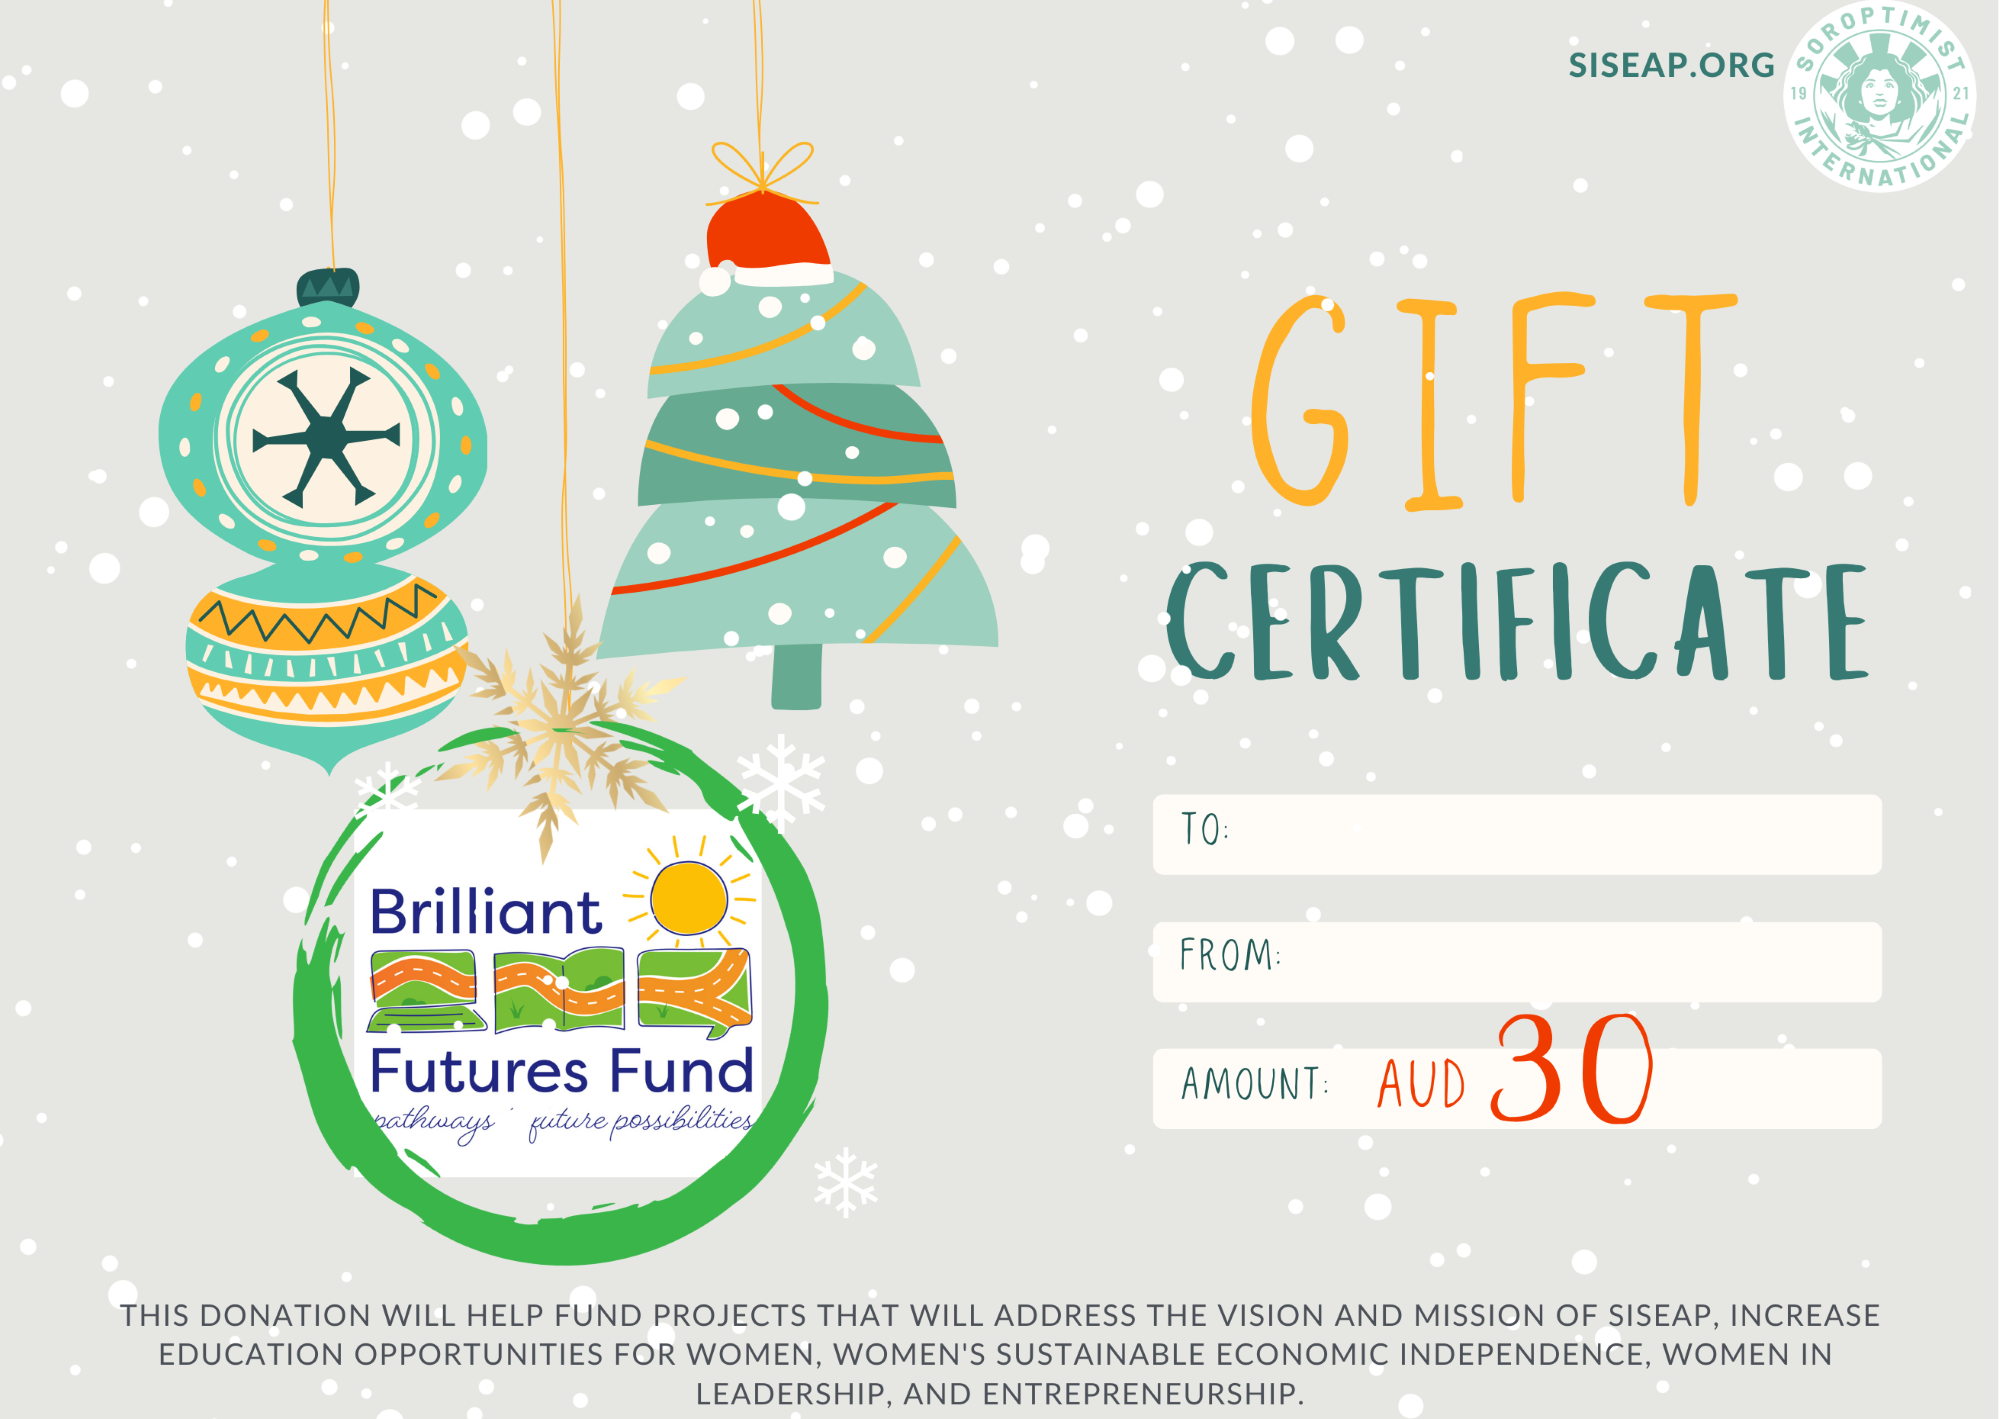 Christmas Gift Certificate - GiftTree 30.00